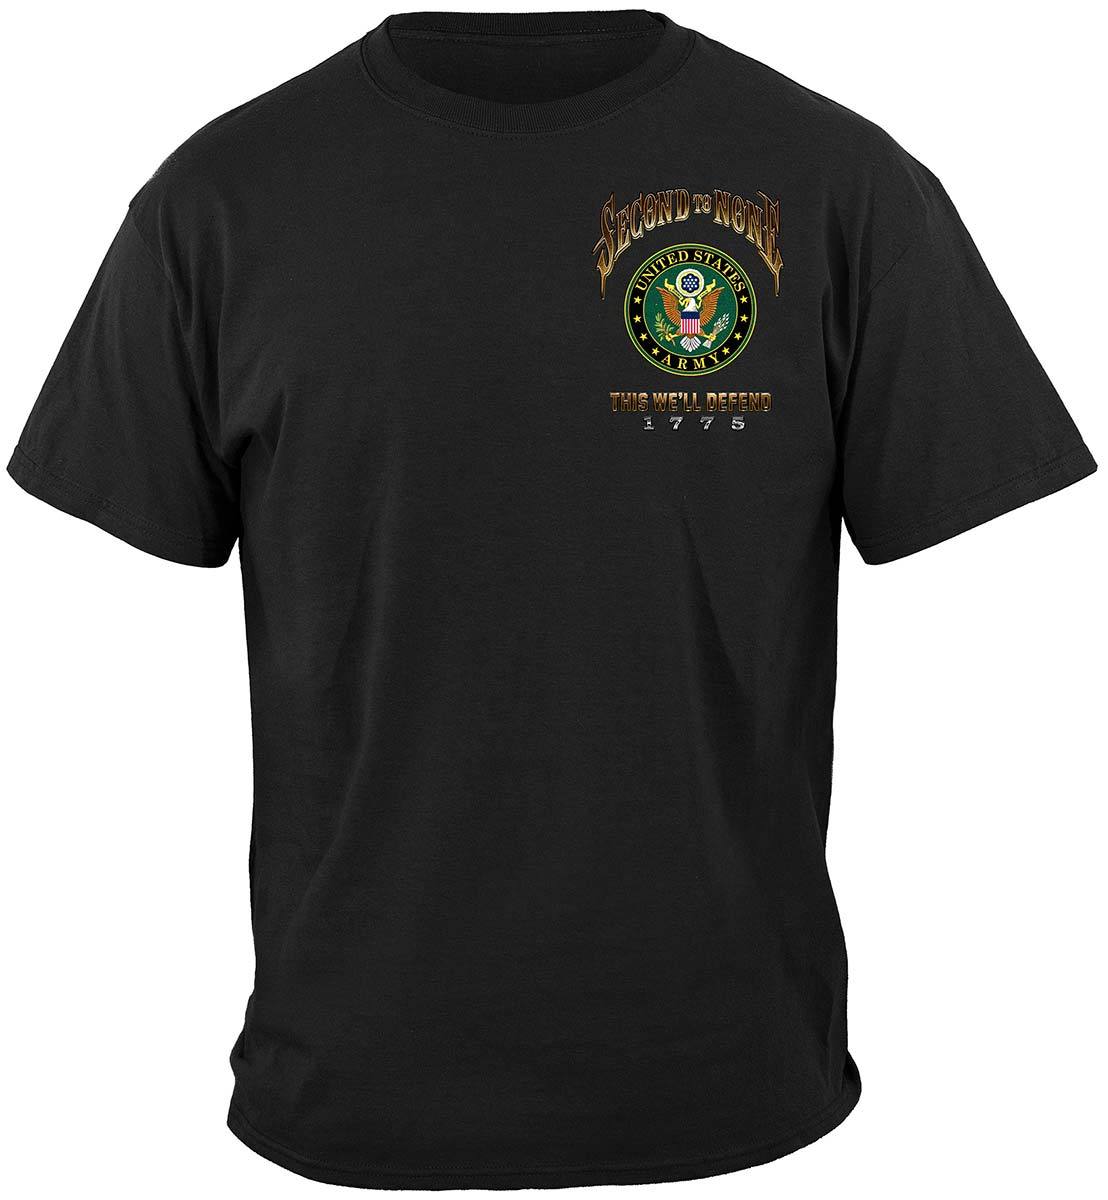 US Army Second To None Premium Long Sleeves